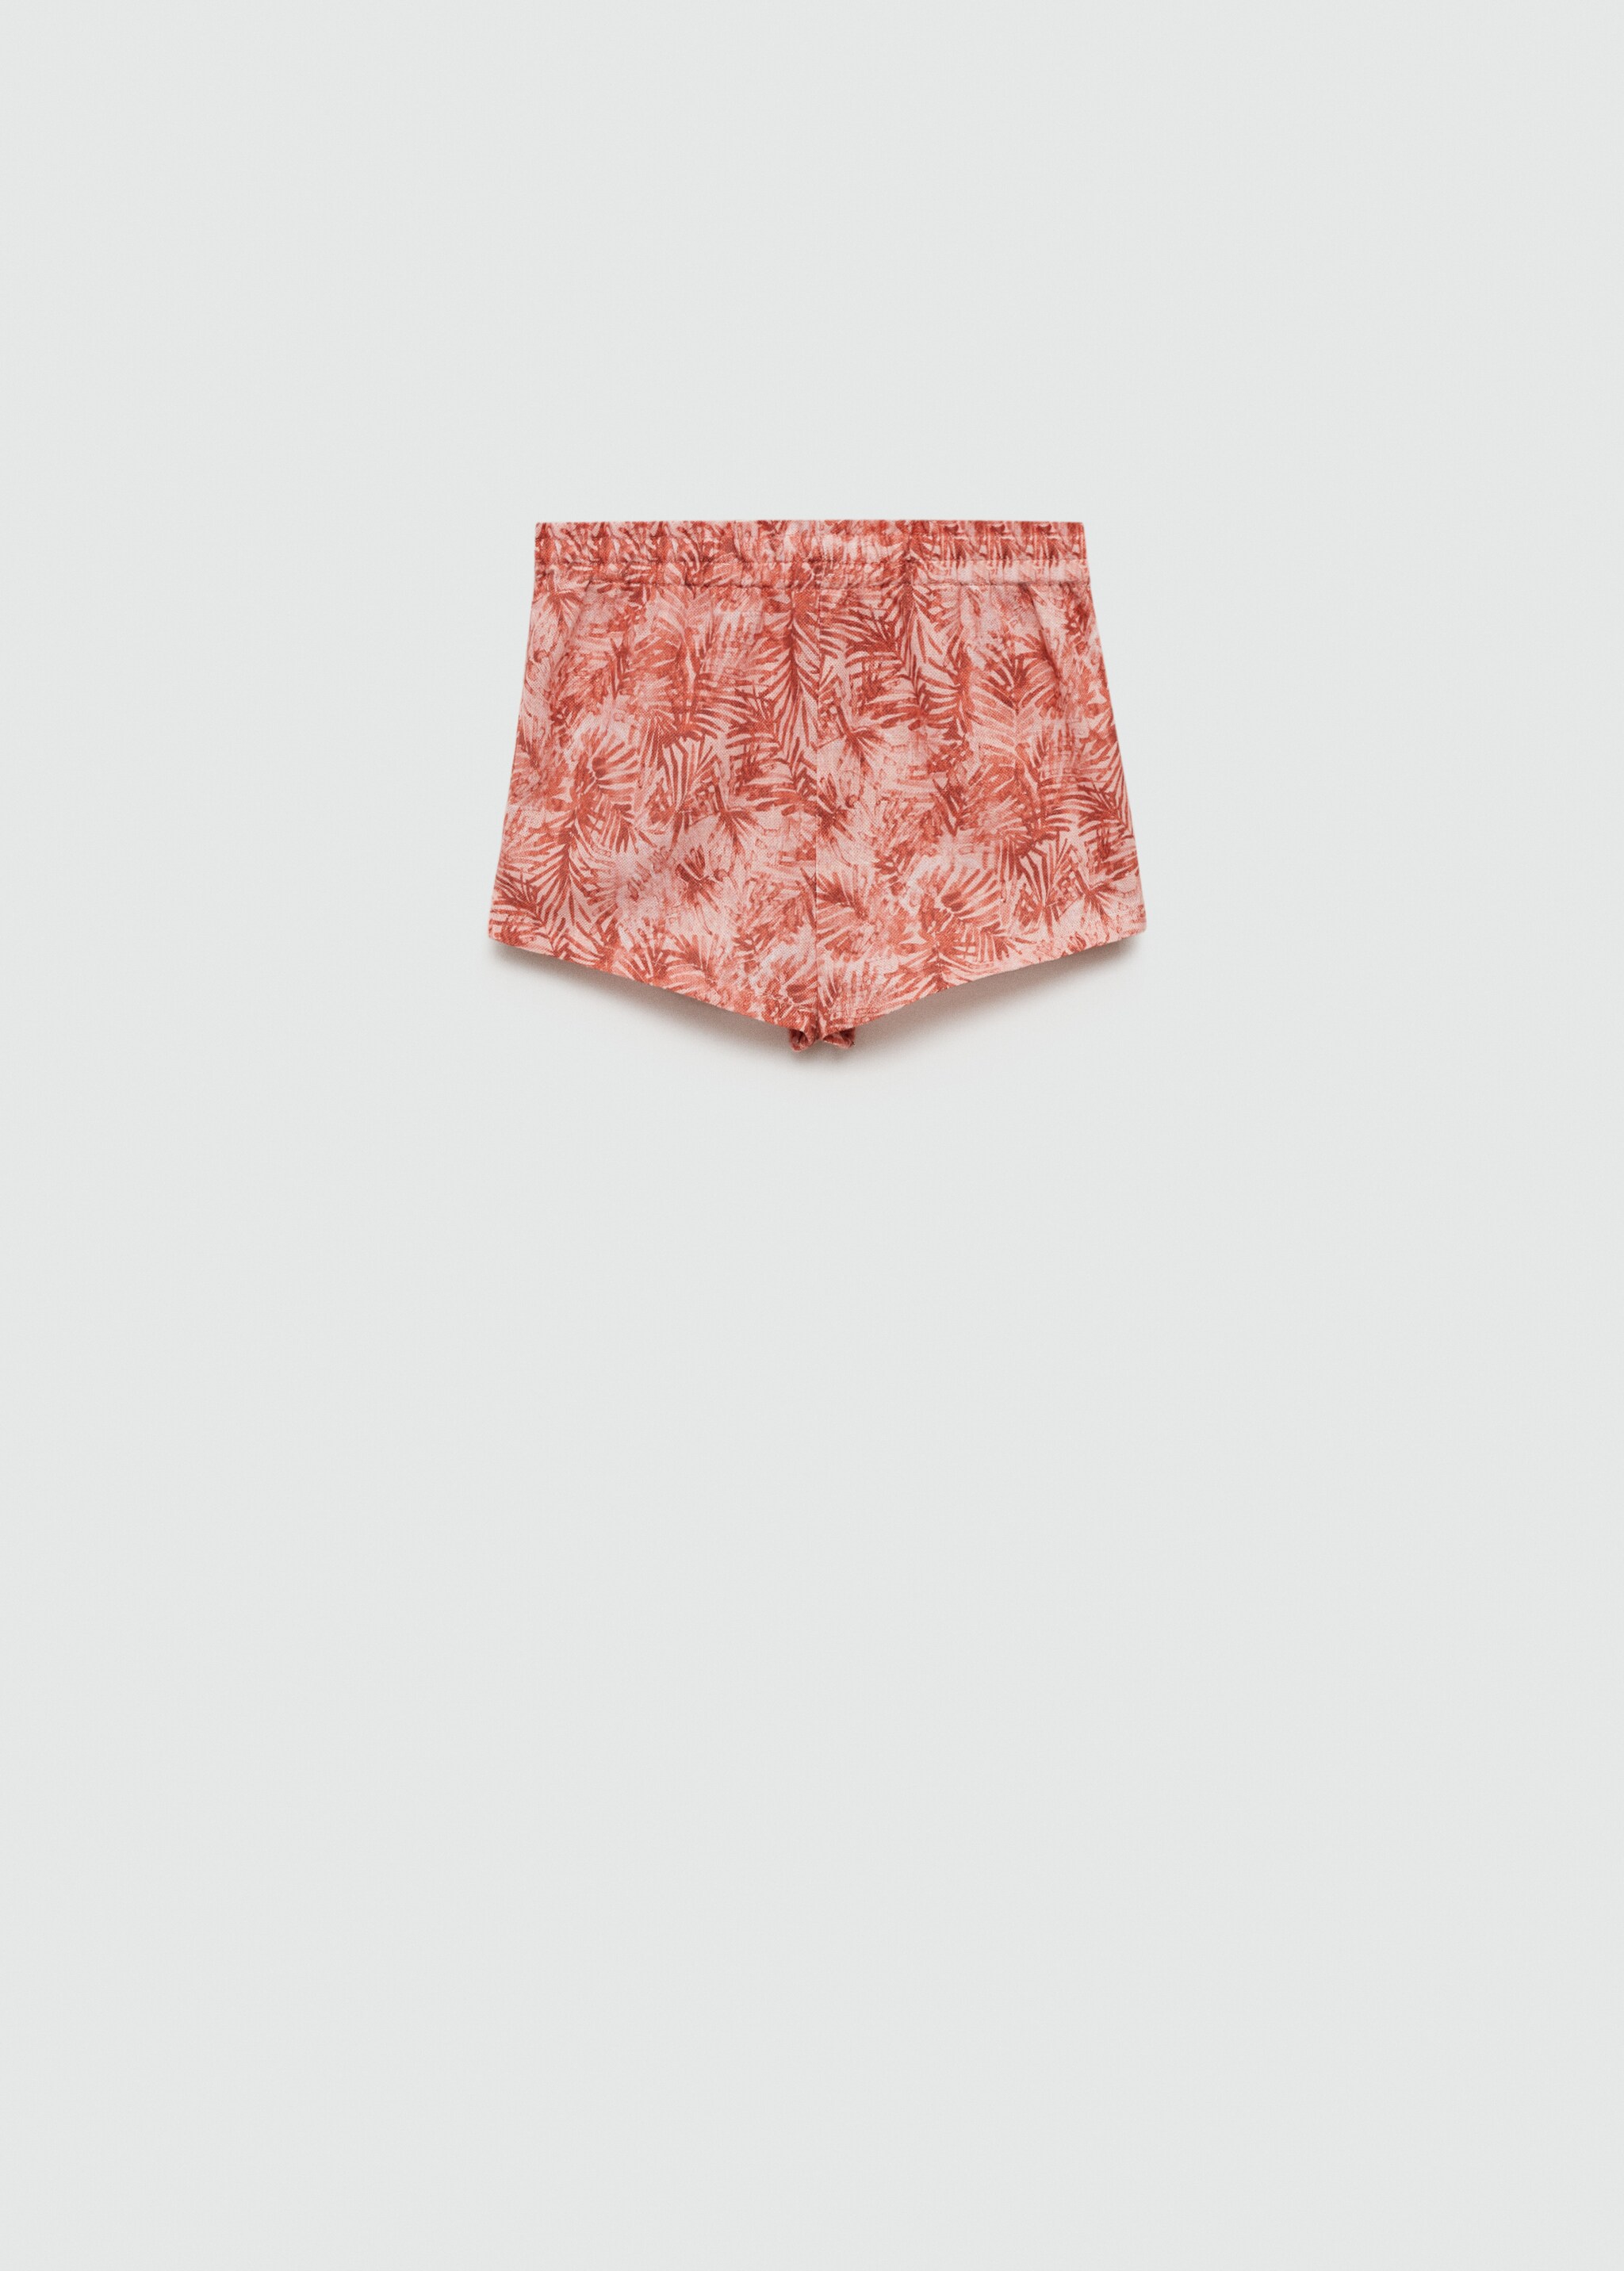 Leaves-texture shorts - Article without model